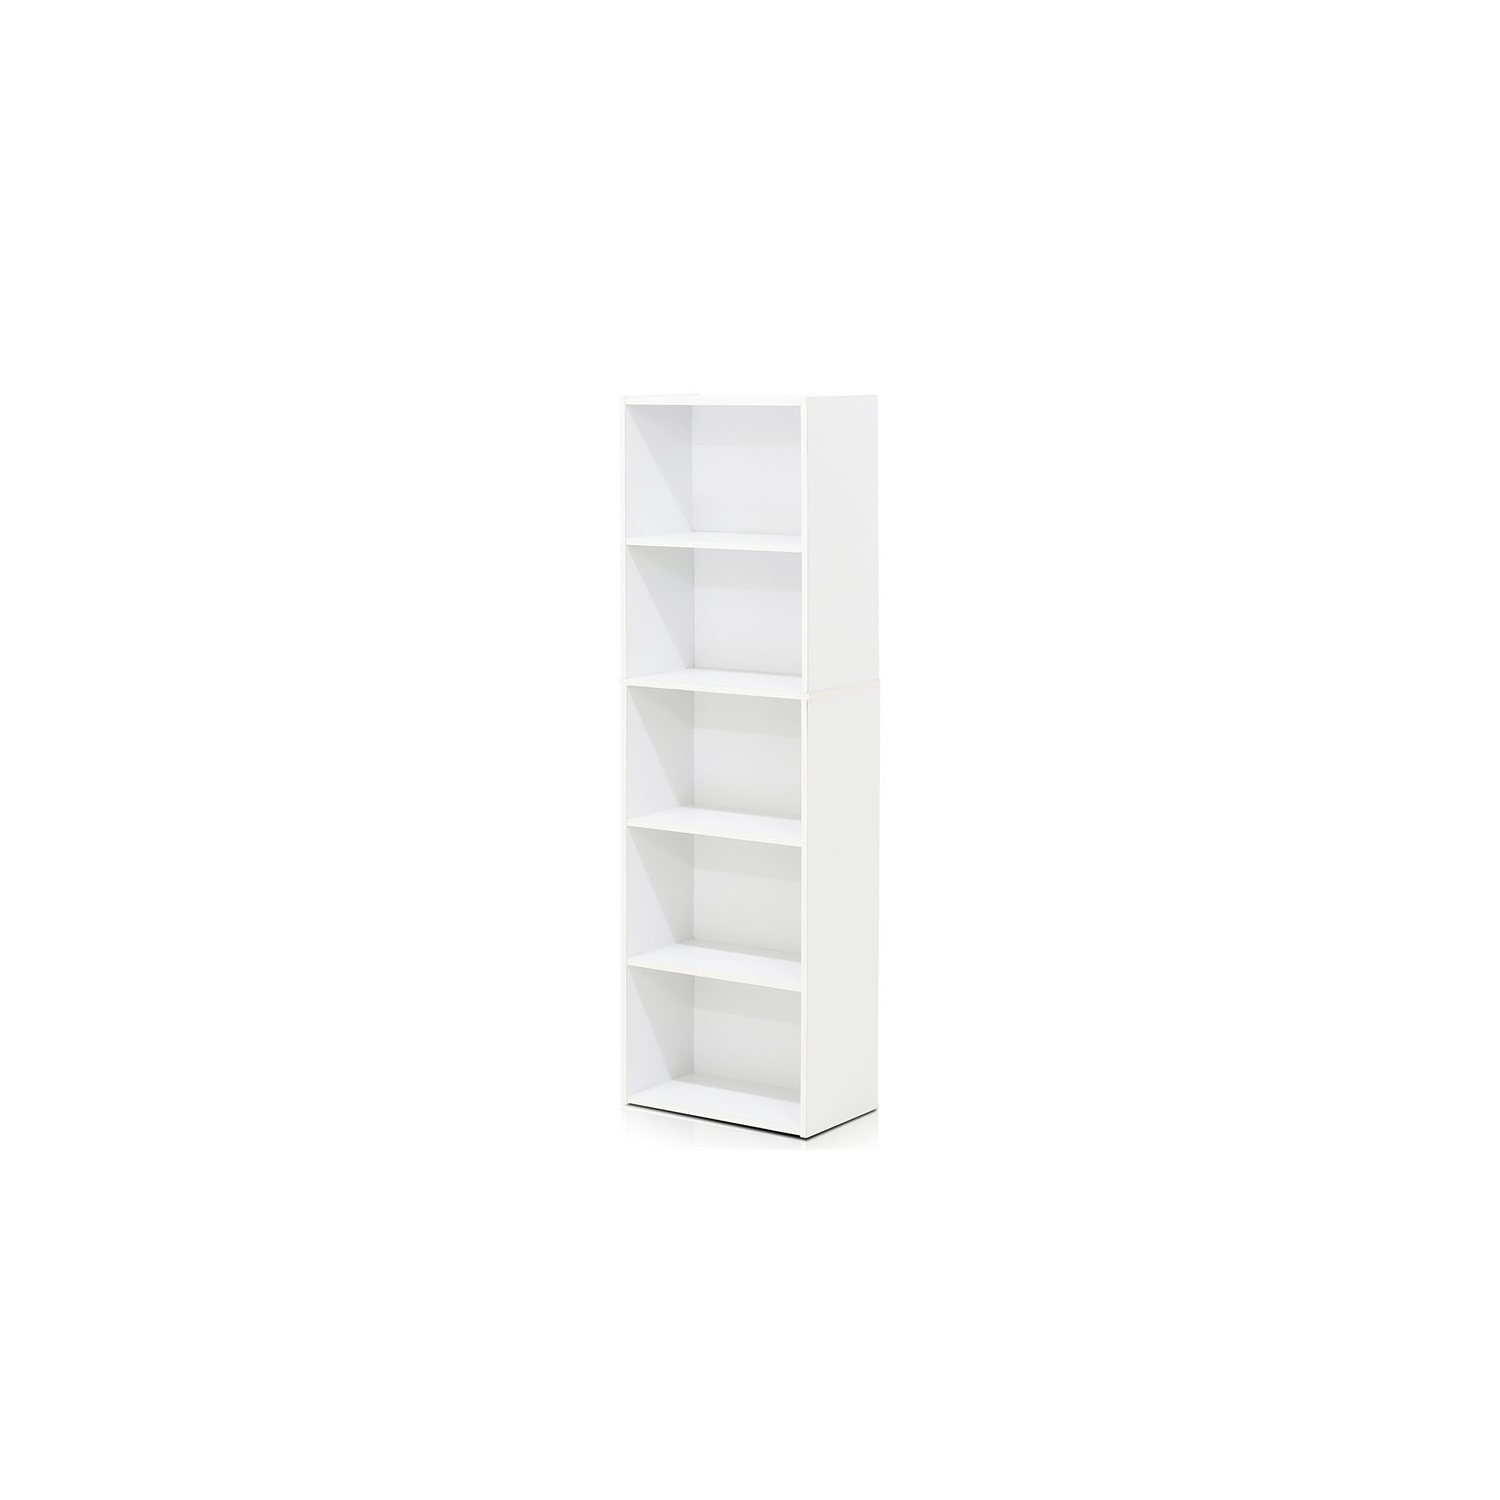 Furinno Luder Wood 5-Tier Reversible Color Open Shelf Bookcase in White